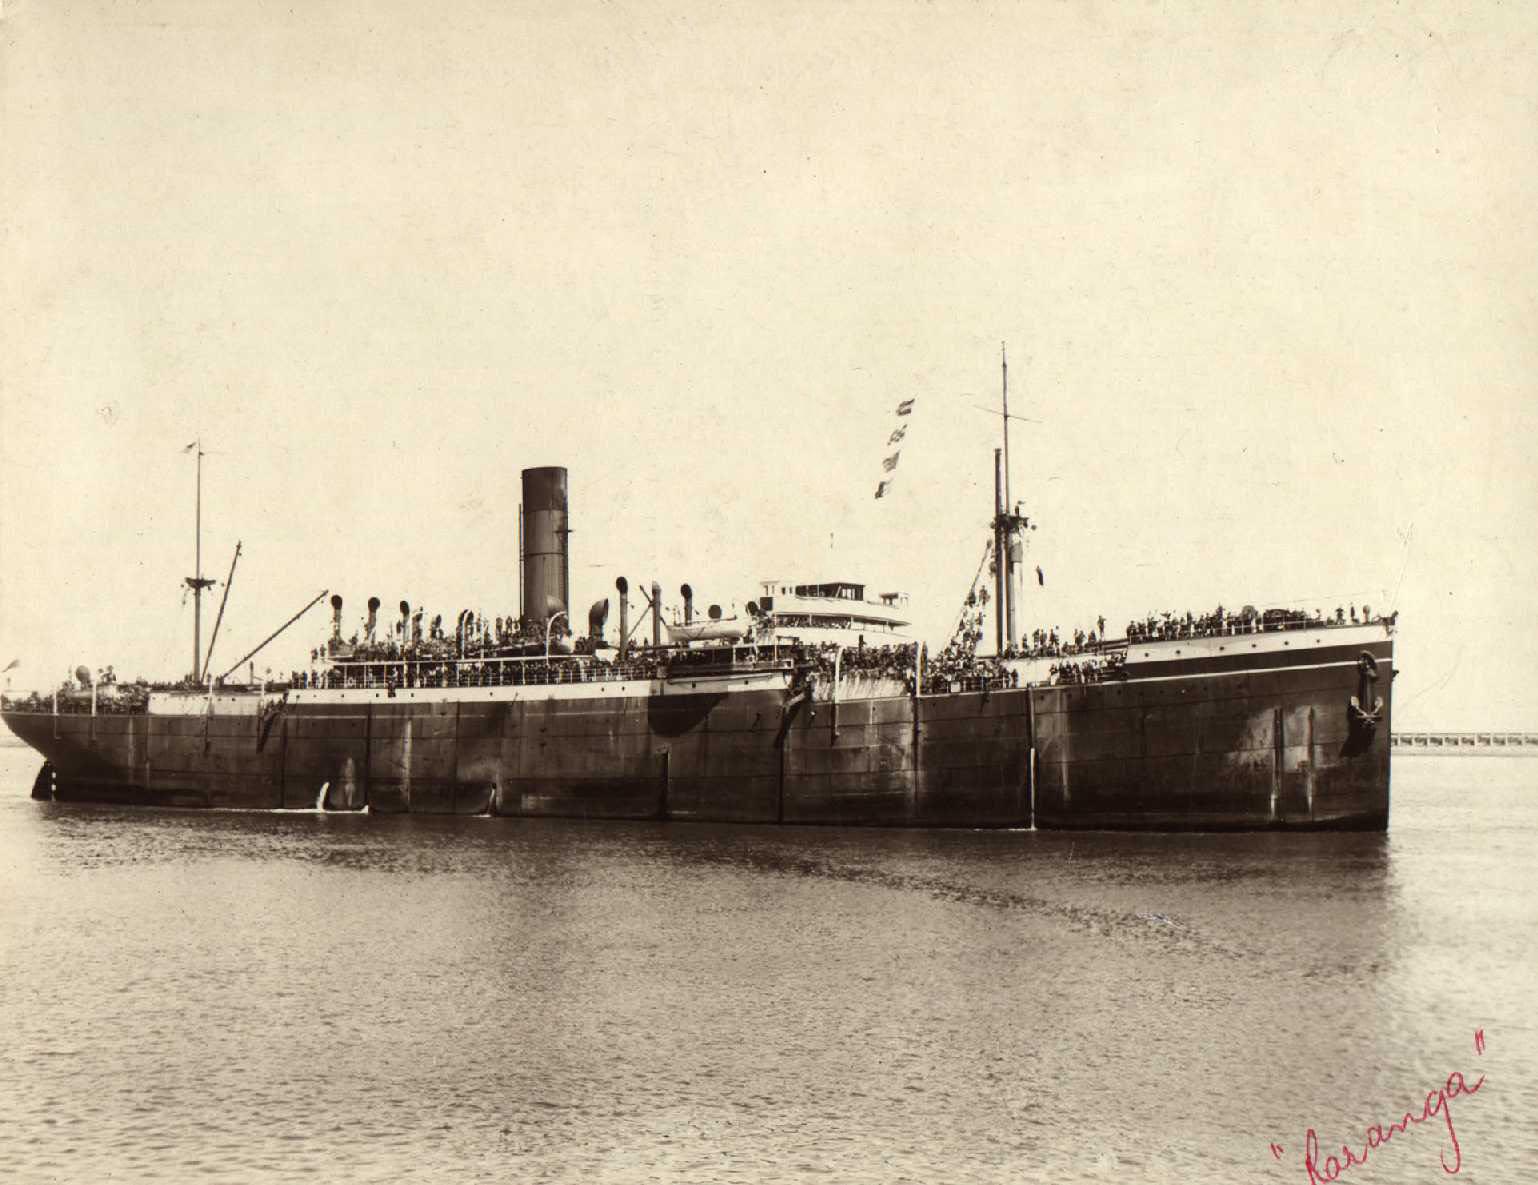 Passenger cargo vessel "S.S. Raranga", built in 1916 at Newcastle by Armstrong Whitworth & Co for Shaw Savill & Albion Co Ltd.  A Steel twin screw steamer.

Tonnage:  10.040 gross
Dimensions:  length 478'0", breadth 63'2", draught 31'2"
Official Numbe